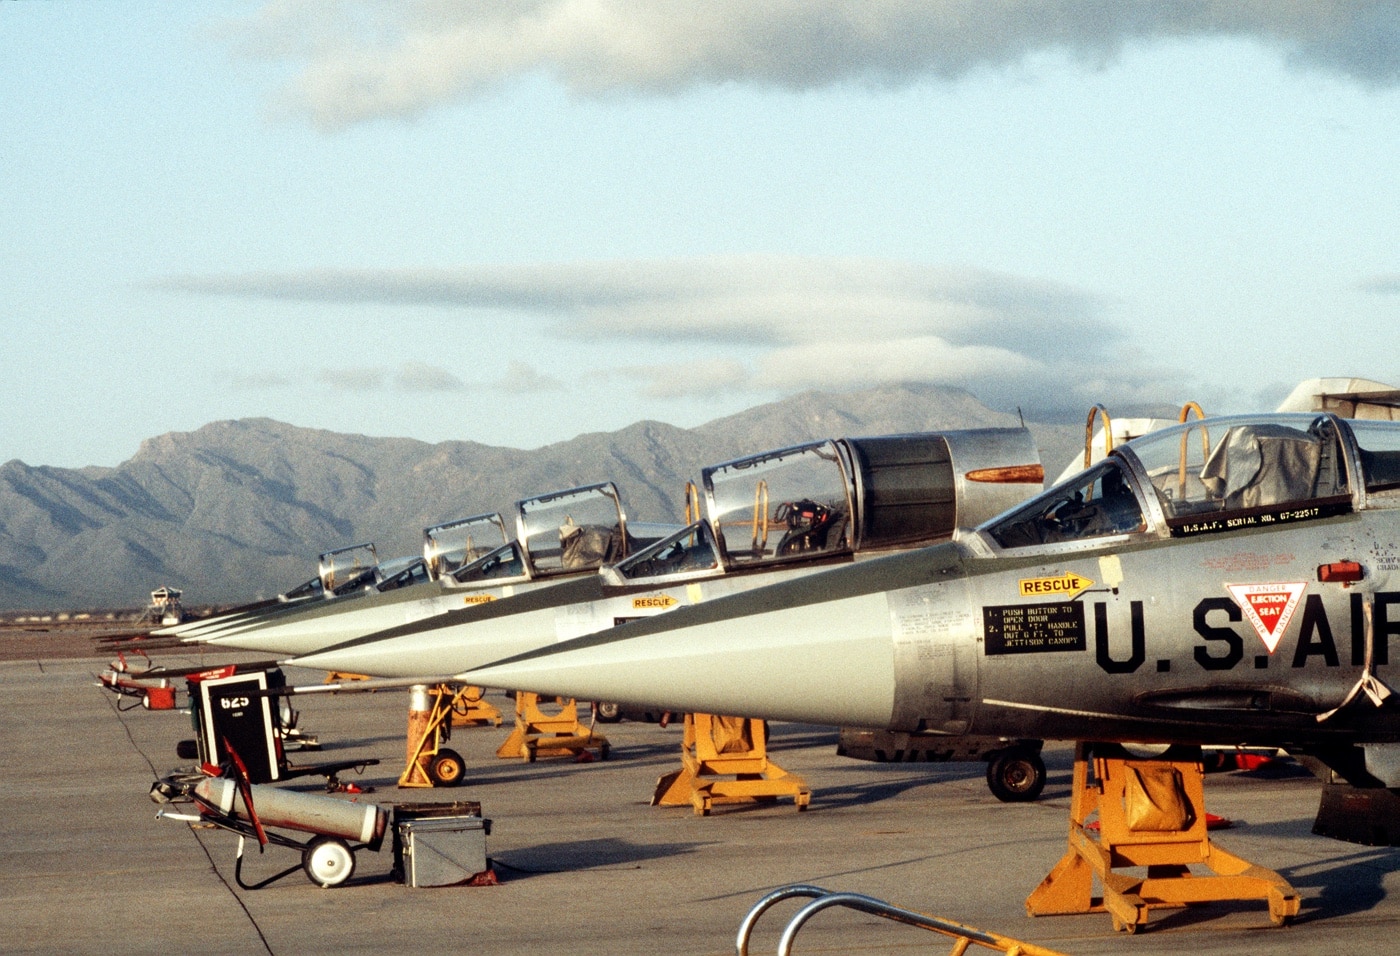 In this image we see Lockheed F-104G Starfighter aircraft parked on the flight line during the training of German military pilots in 1982.